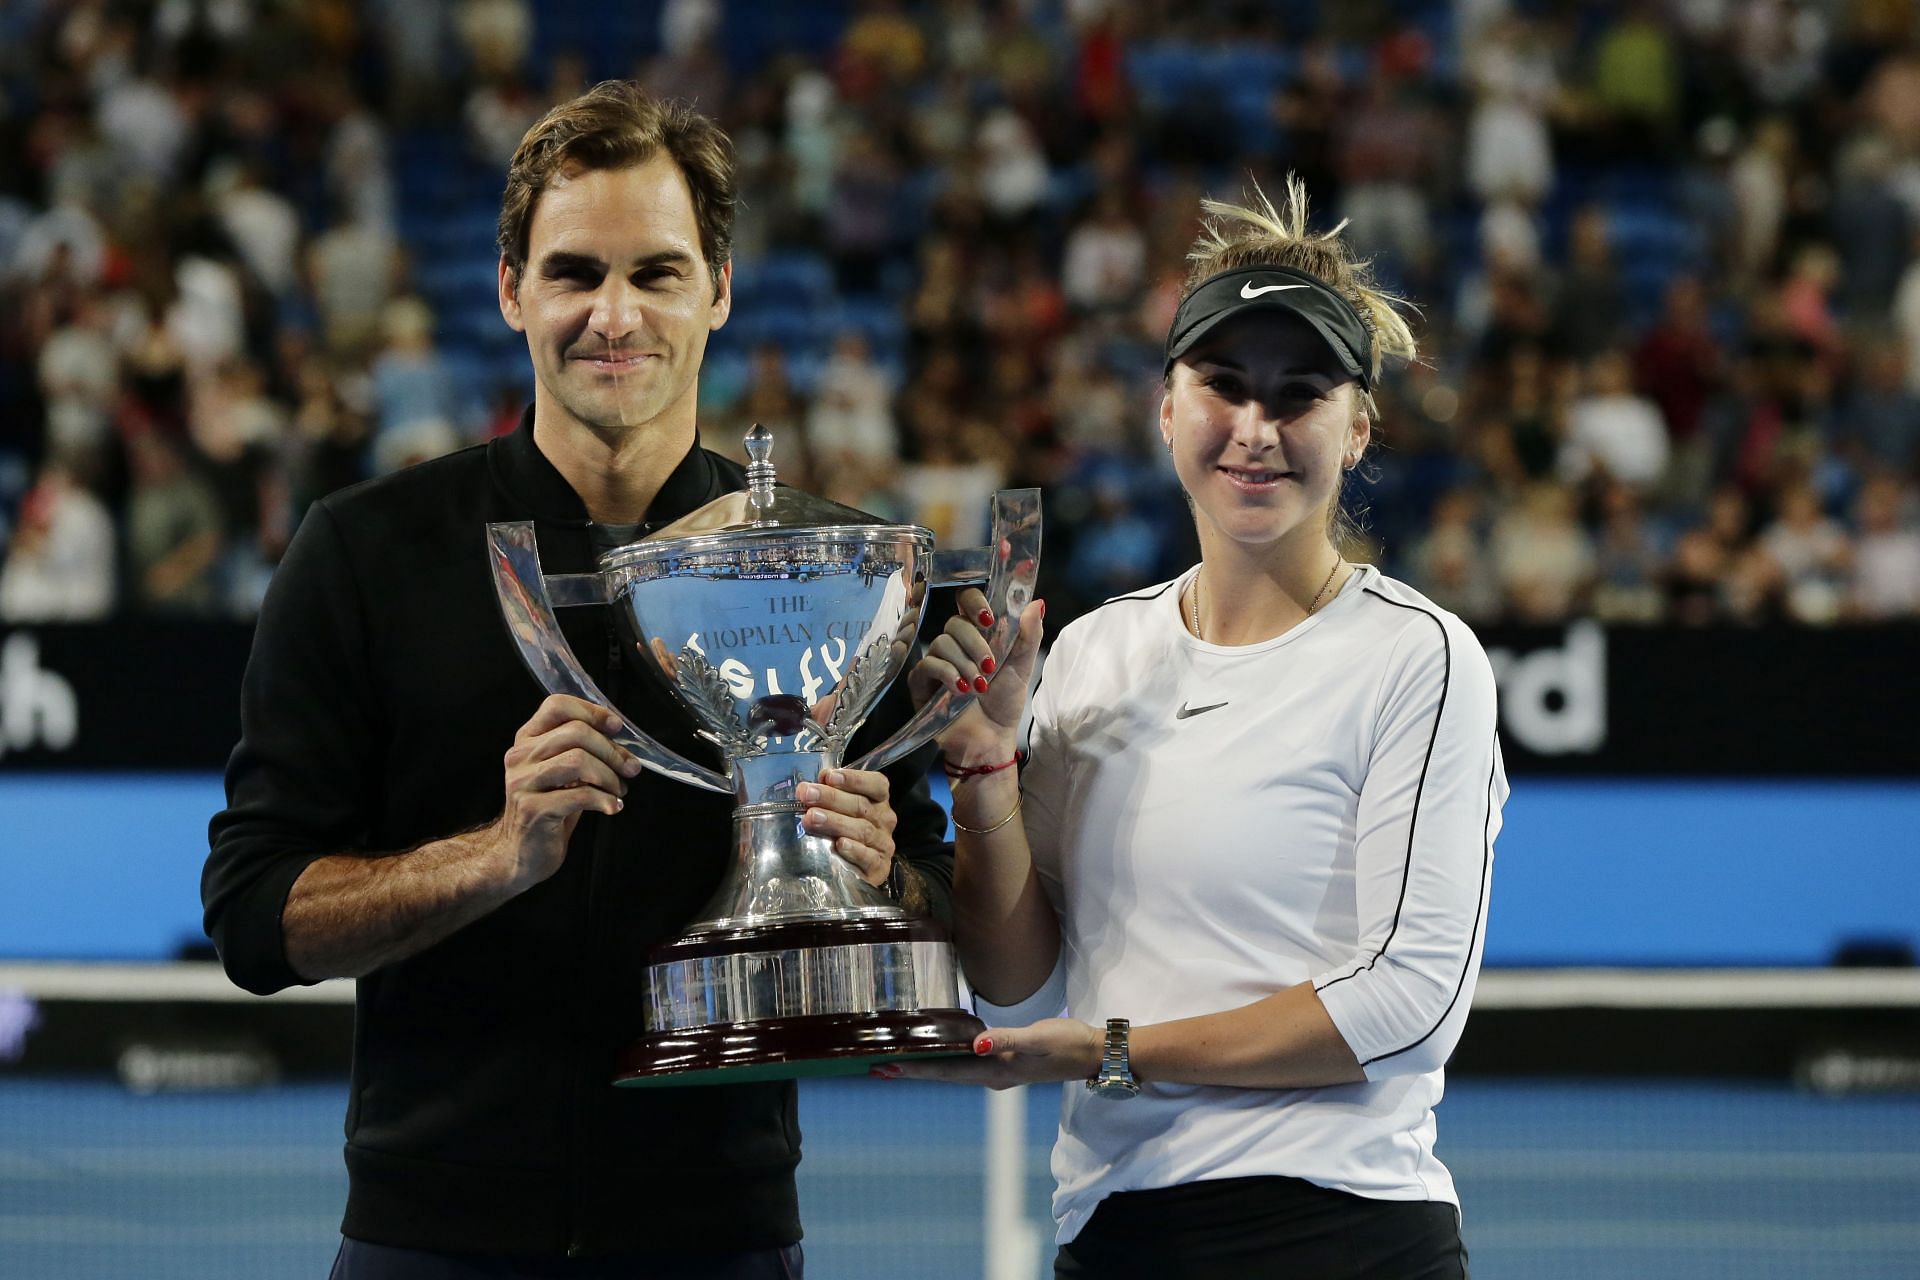 Hopman Cup 2023: Where to watch, TV schedule, live streaming details, and more